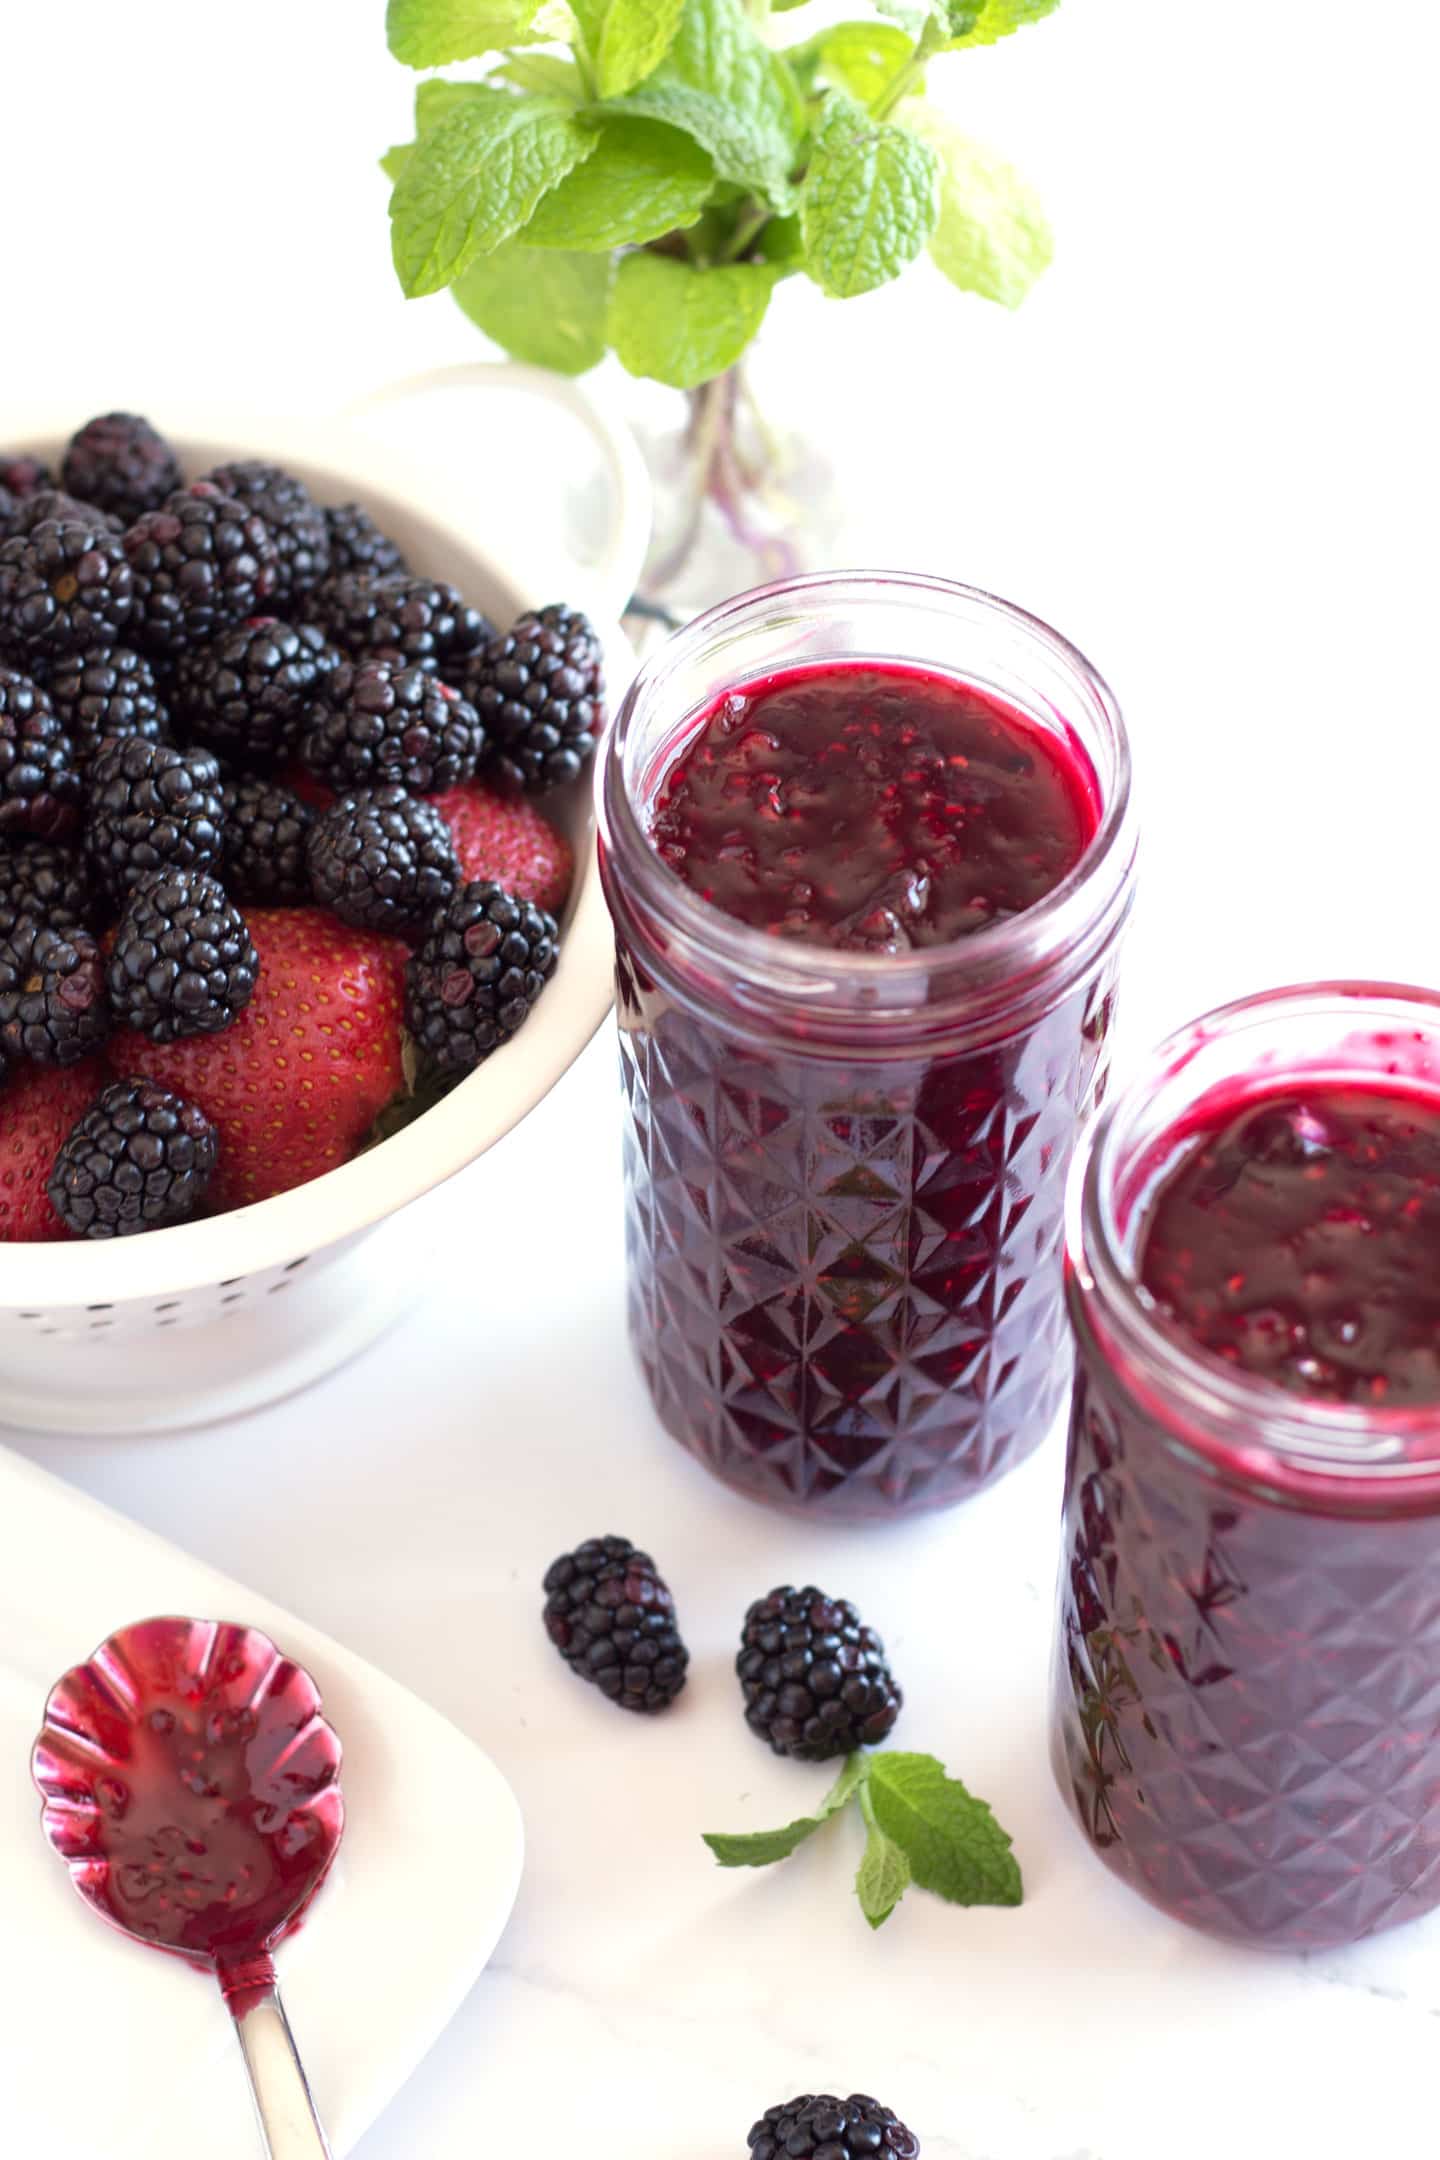 Jars of sauce with basket of fresh berries on side.